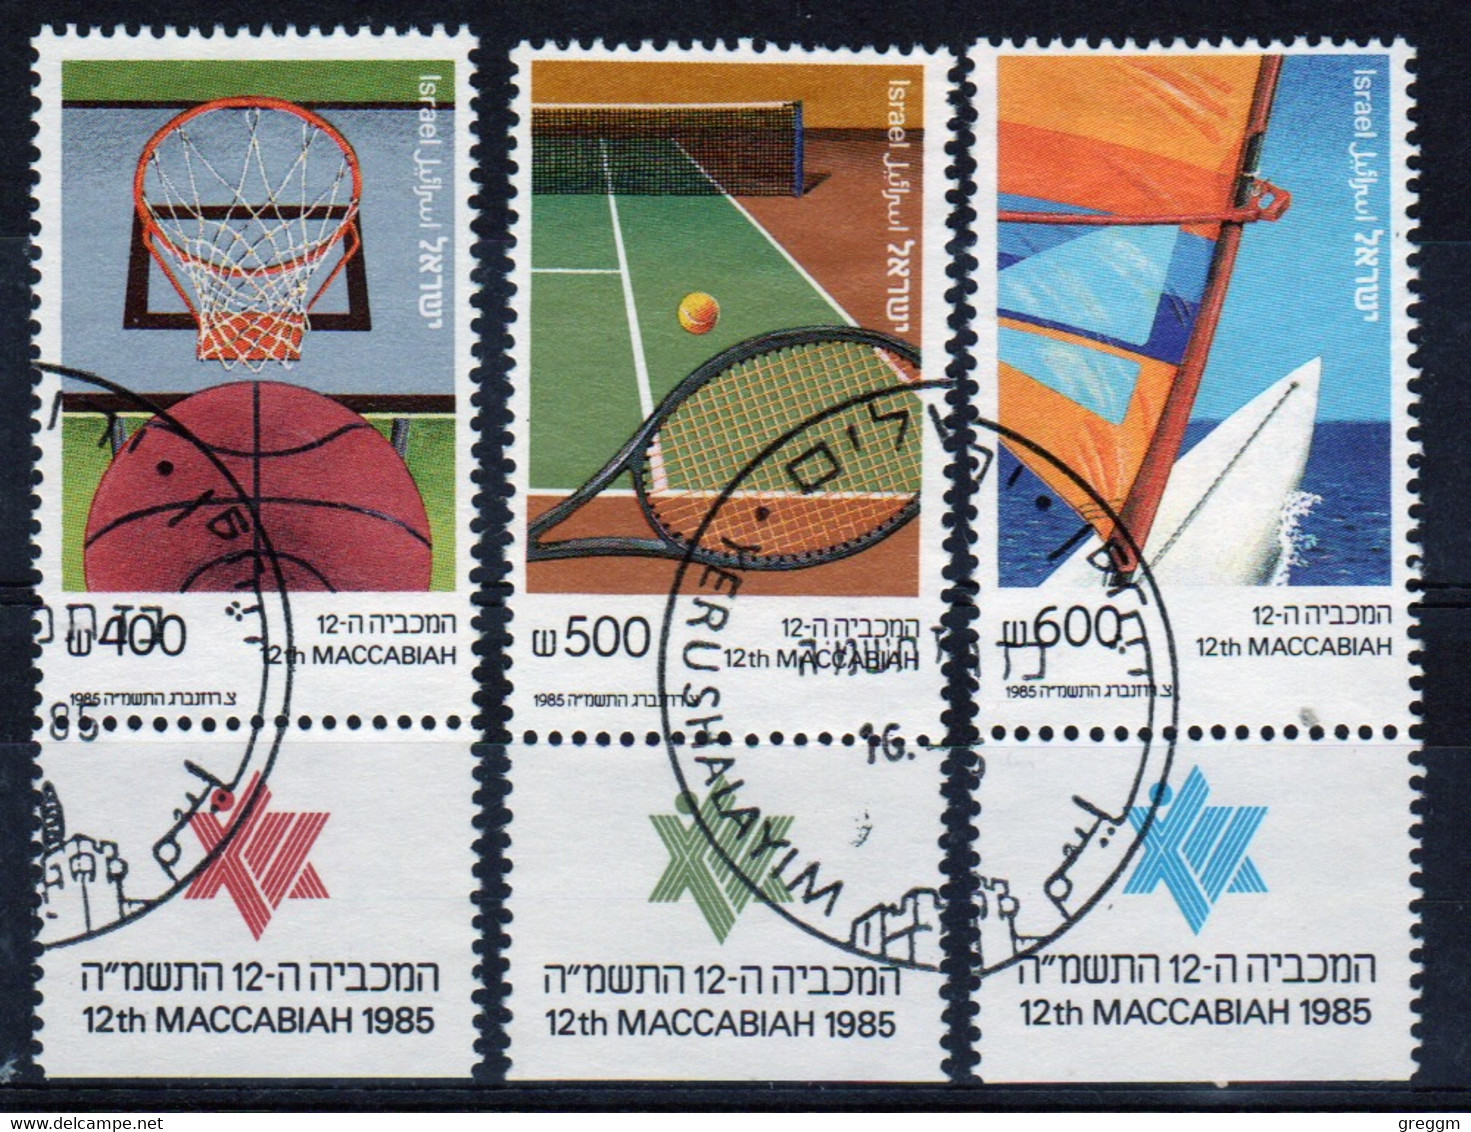 Israel Set Of Stamps From 1985 To Celebrate Makkabiade Games In Fine Used With Tabs - Gebraucht (mit Tabs)